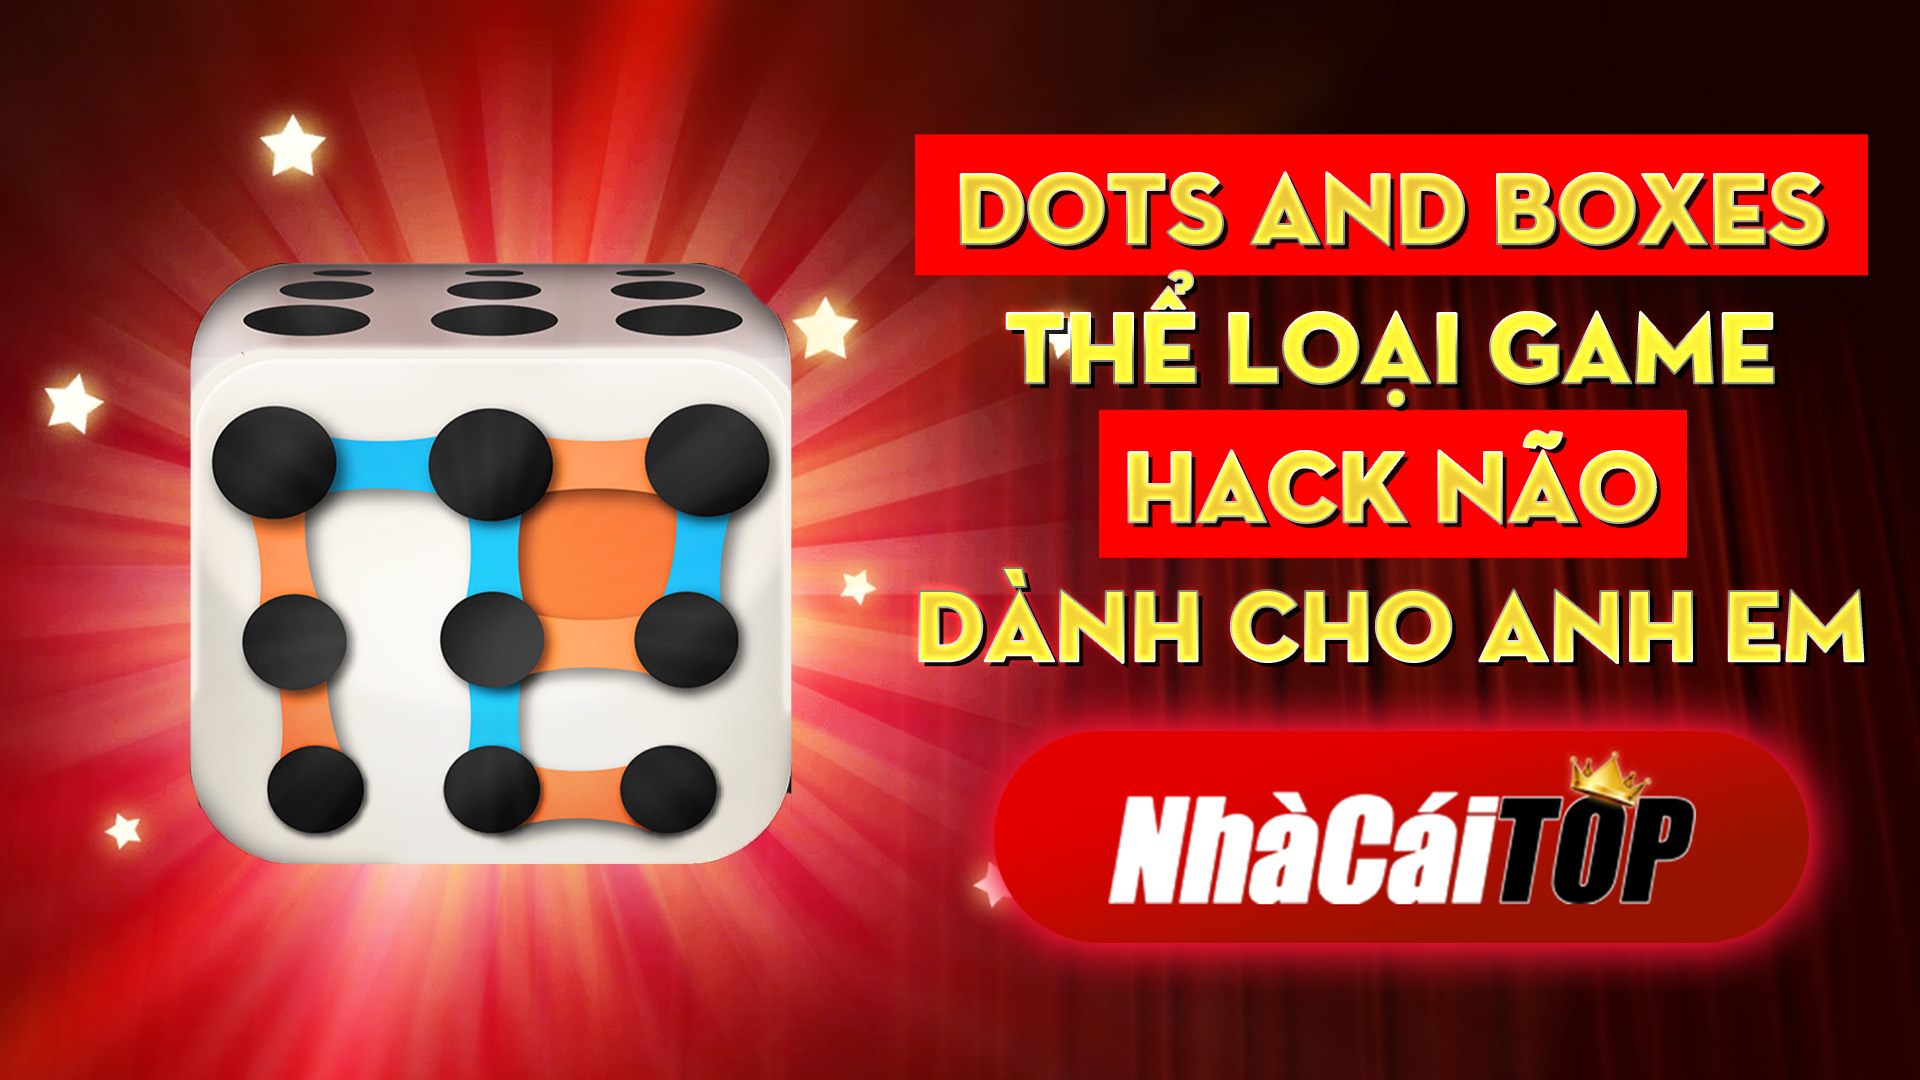 325 Dots And Boxes – The Loai Game Hack Nao Danh Cho Anh Em